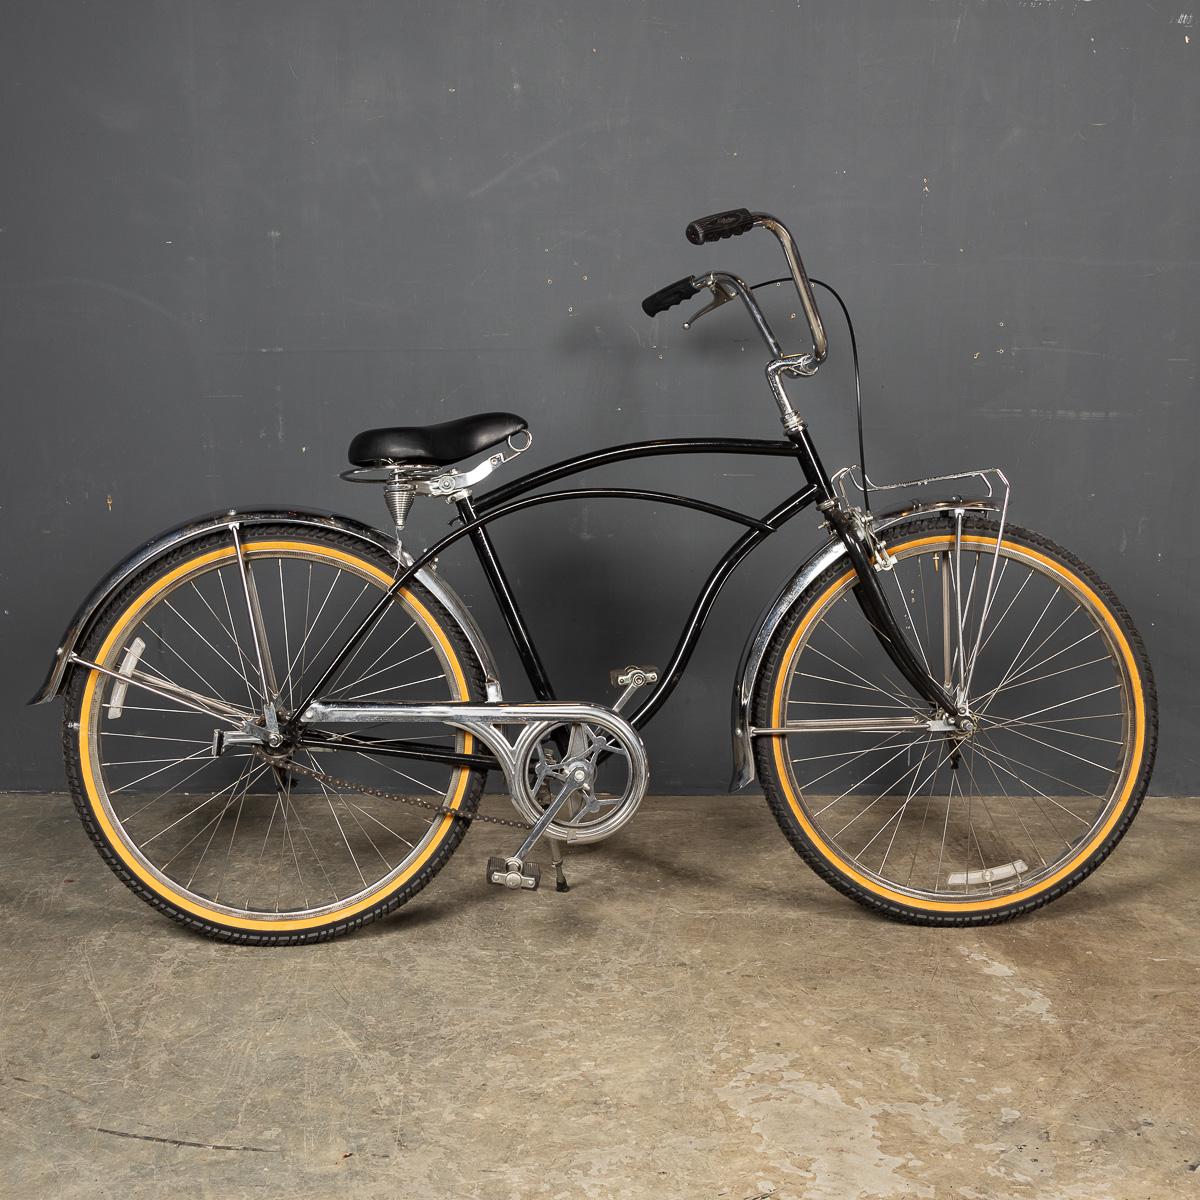 An impeccably restored Dutch fixed gear bicycle from 20th-century Amsterdam. Crafted in the 1950s, it boasts polished metal mudguards, a chain guard, and vintage-style handlebars. Its padded seat, equipped with spring-loaded suspension, ensures a